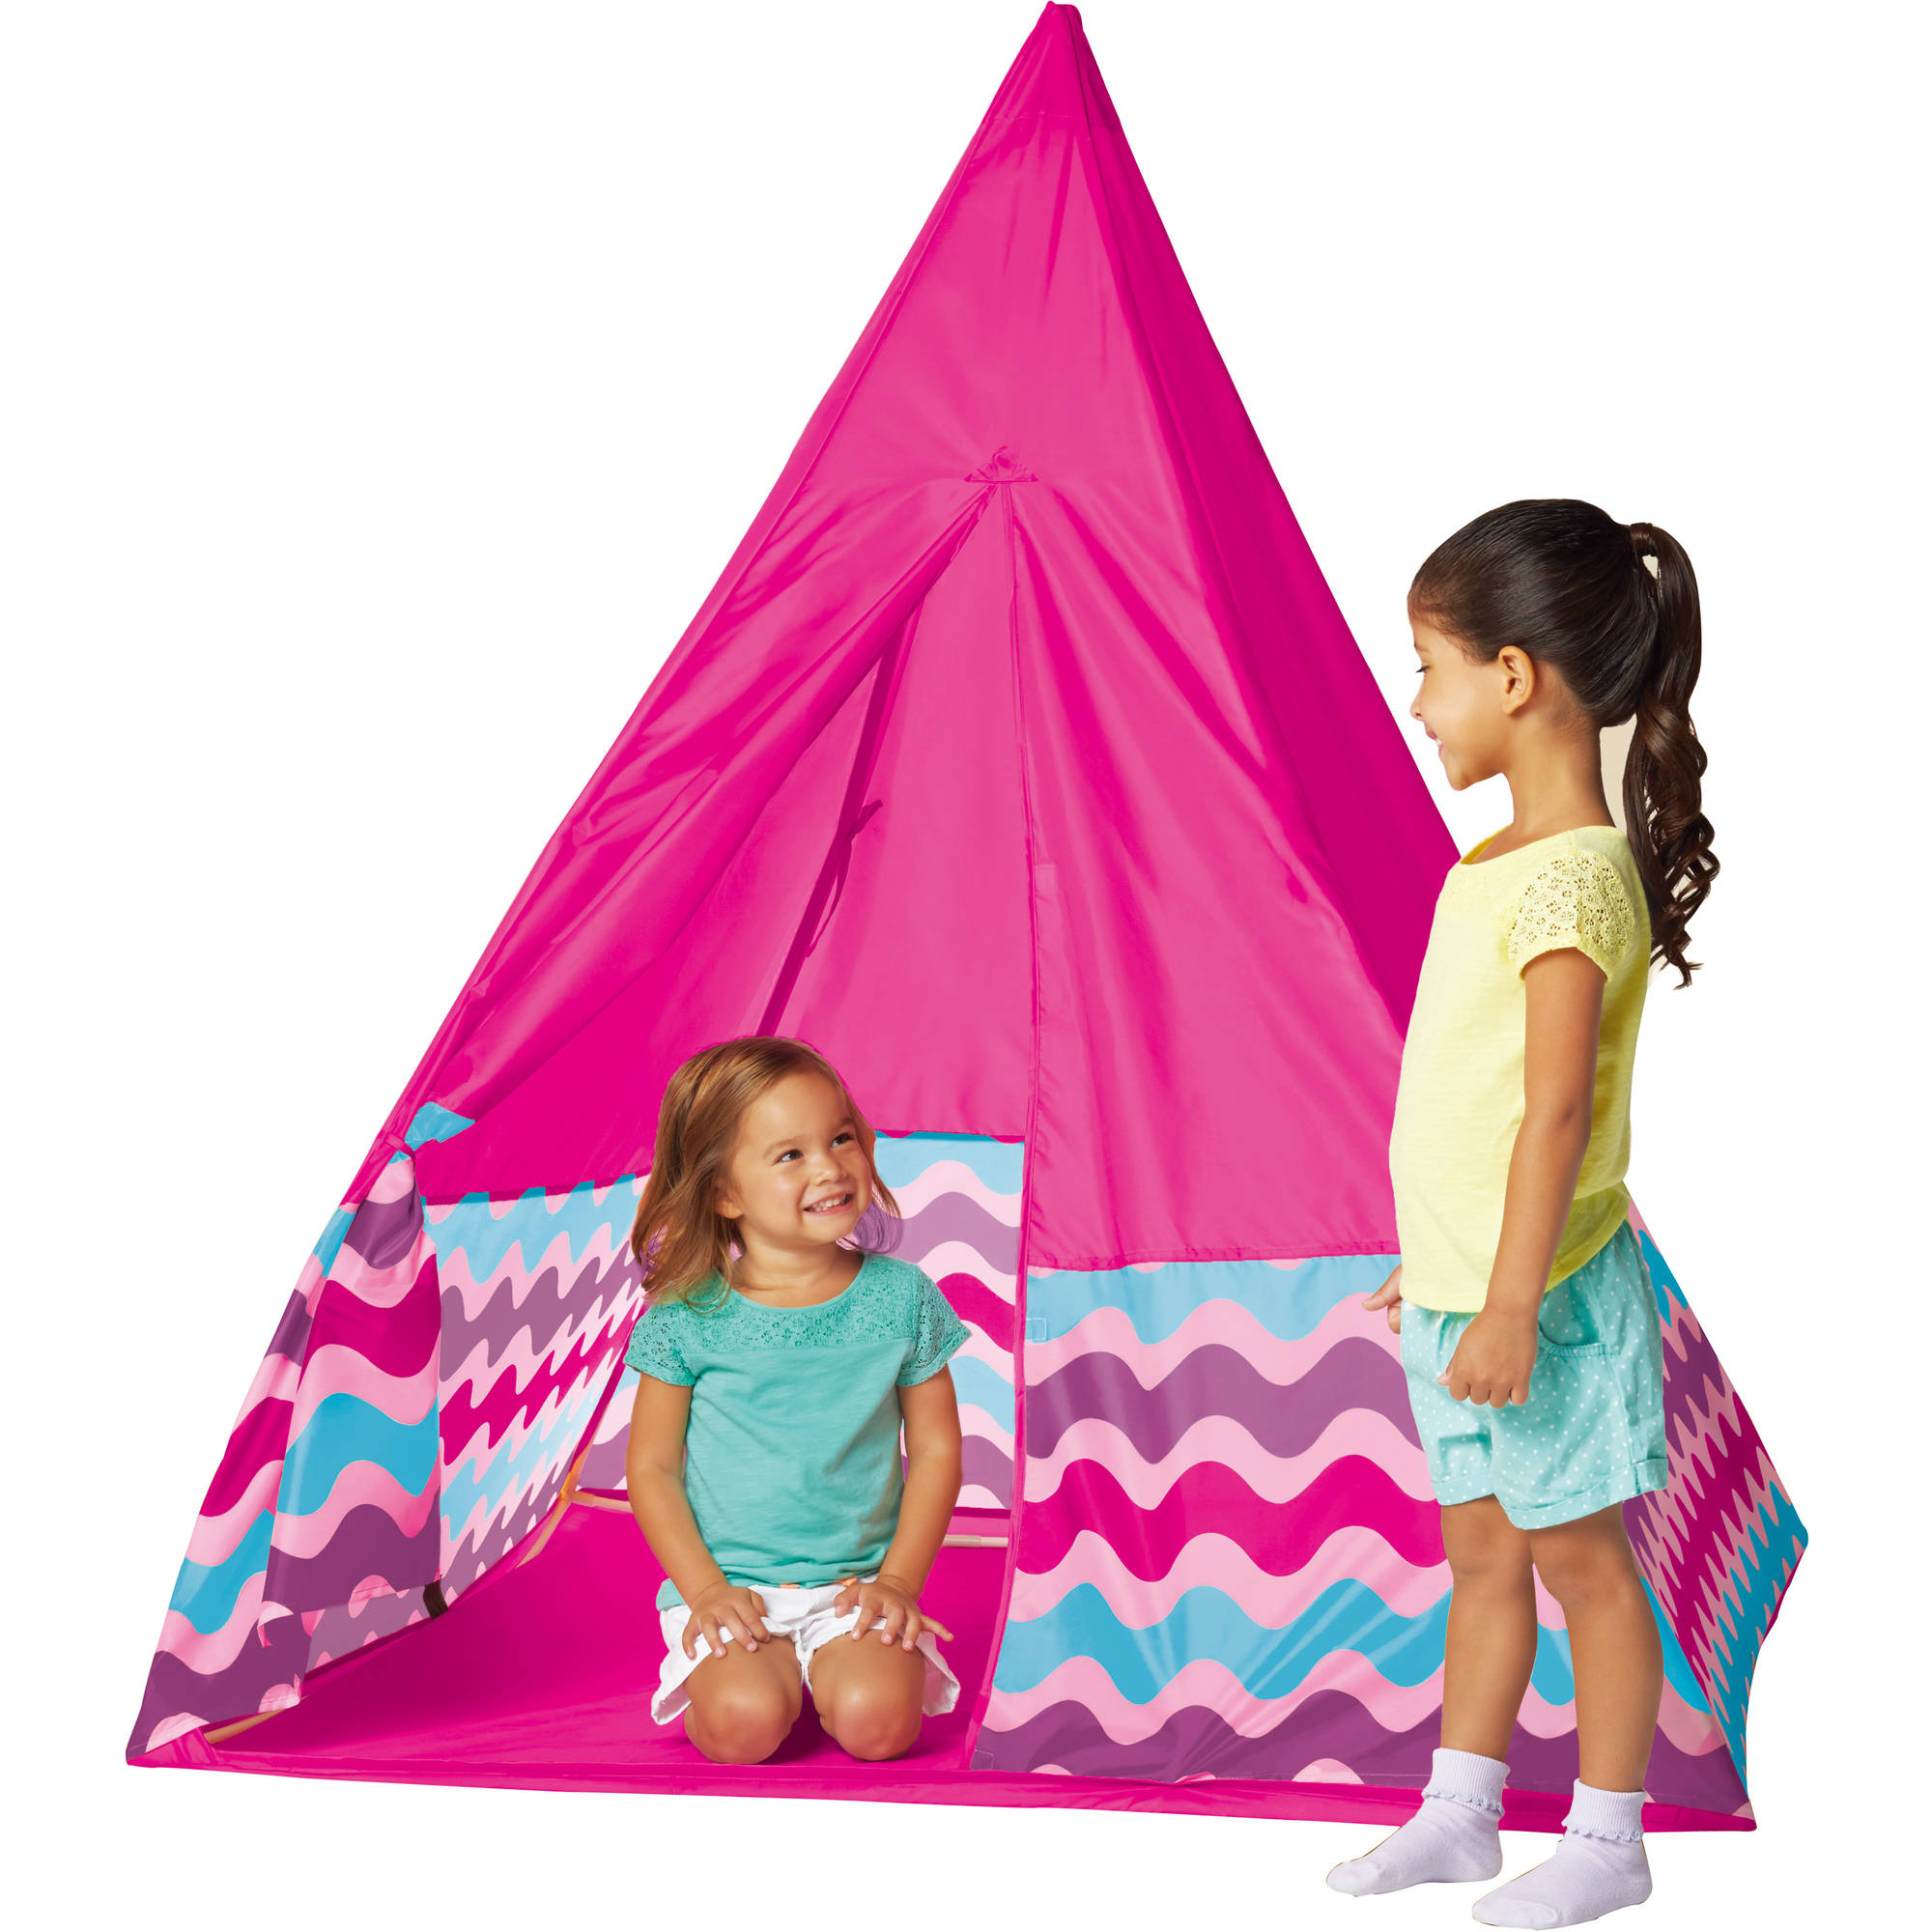 Chevron Patterned Fabric Kids' Play Tepee, Pink - image 2 of 2